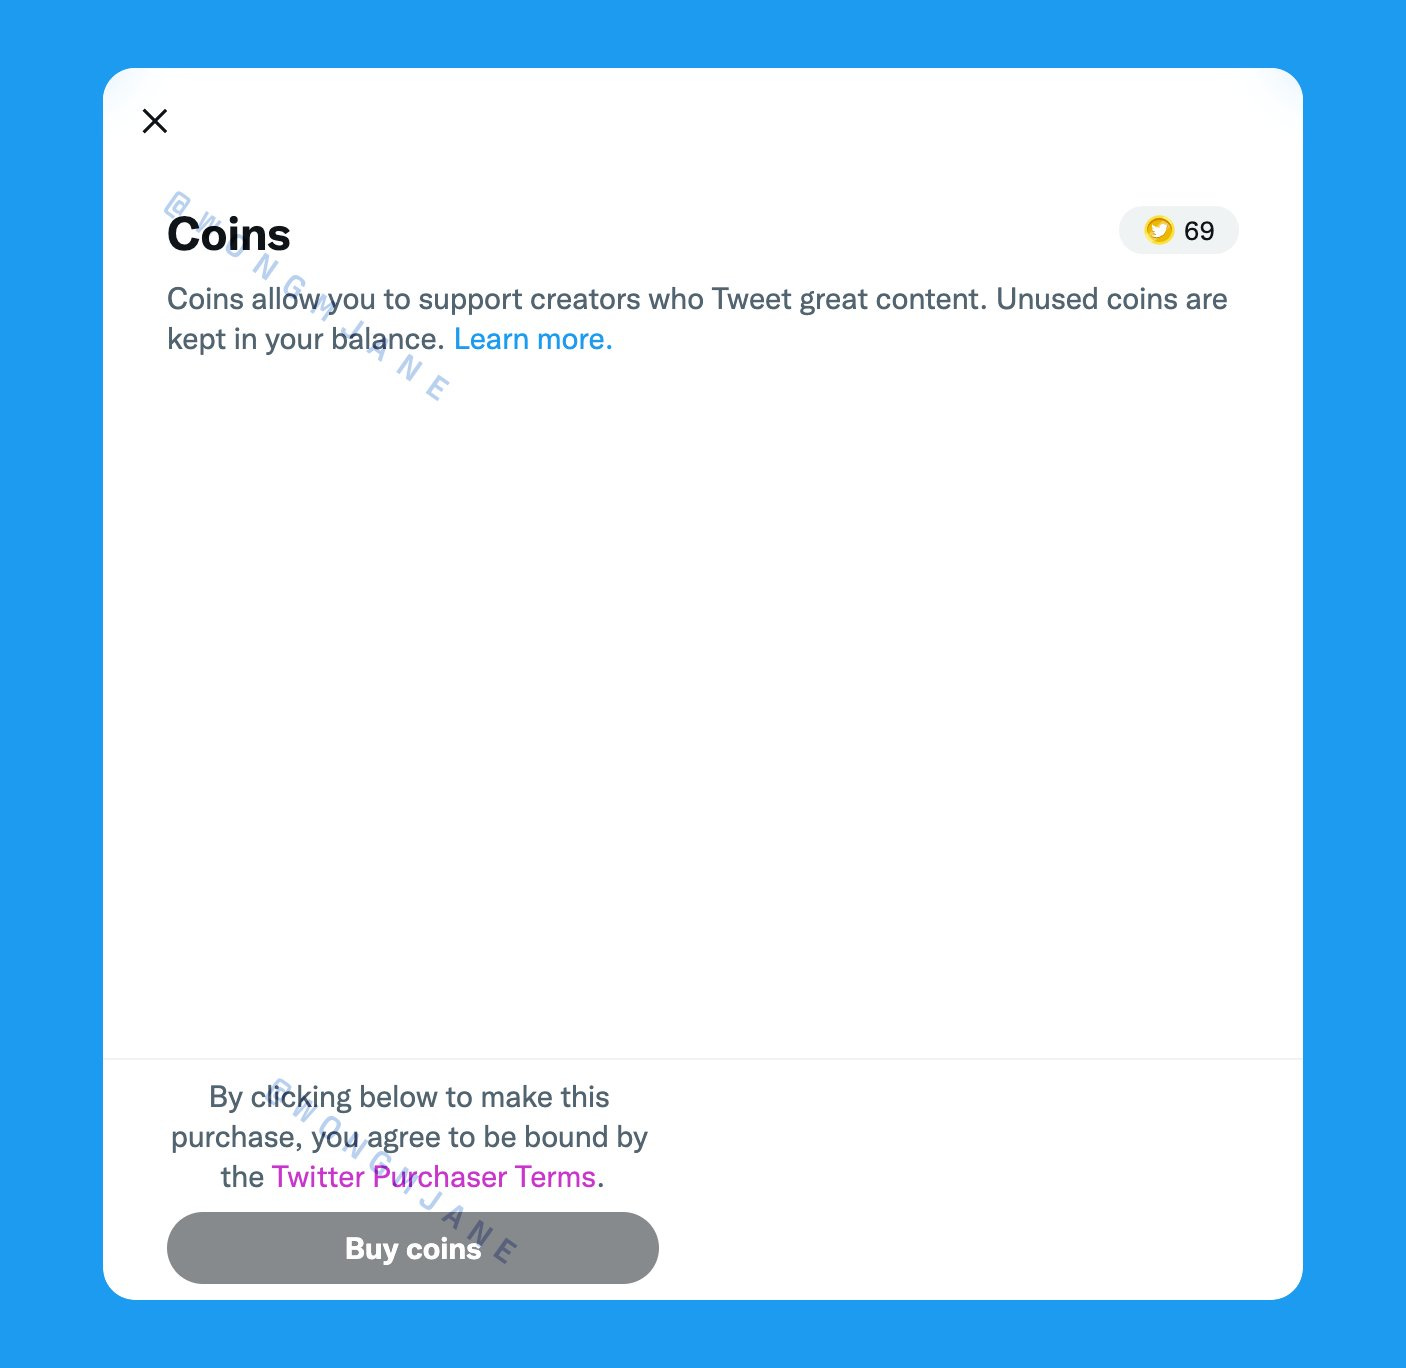 Coins
Coins allow you to support creators who Tweet great content. Unused coins are kept in your balance.Learn more.

By clicking below to make this purchase, you agree to be bound by the Twitter Purchaser Terms.